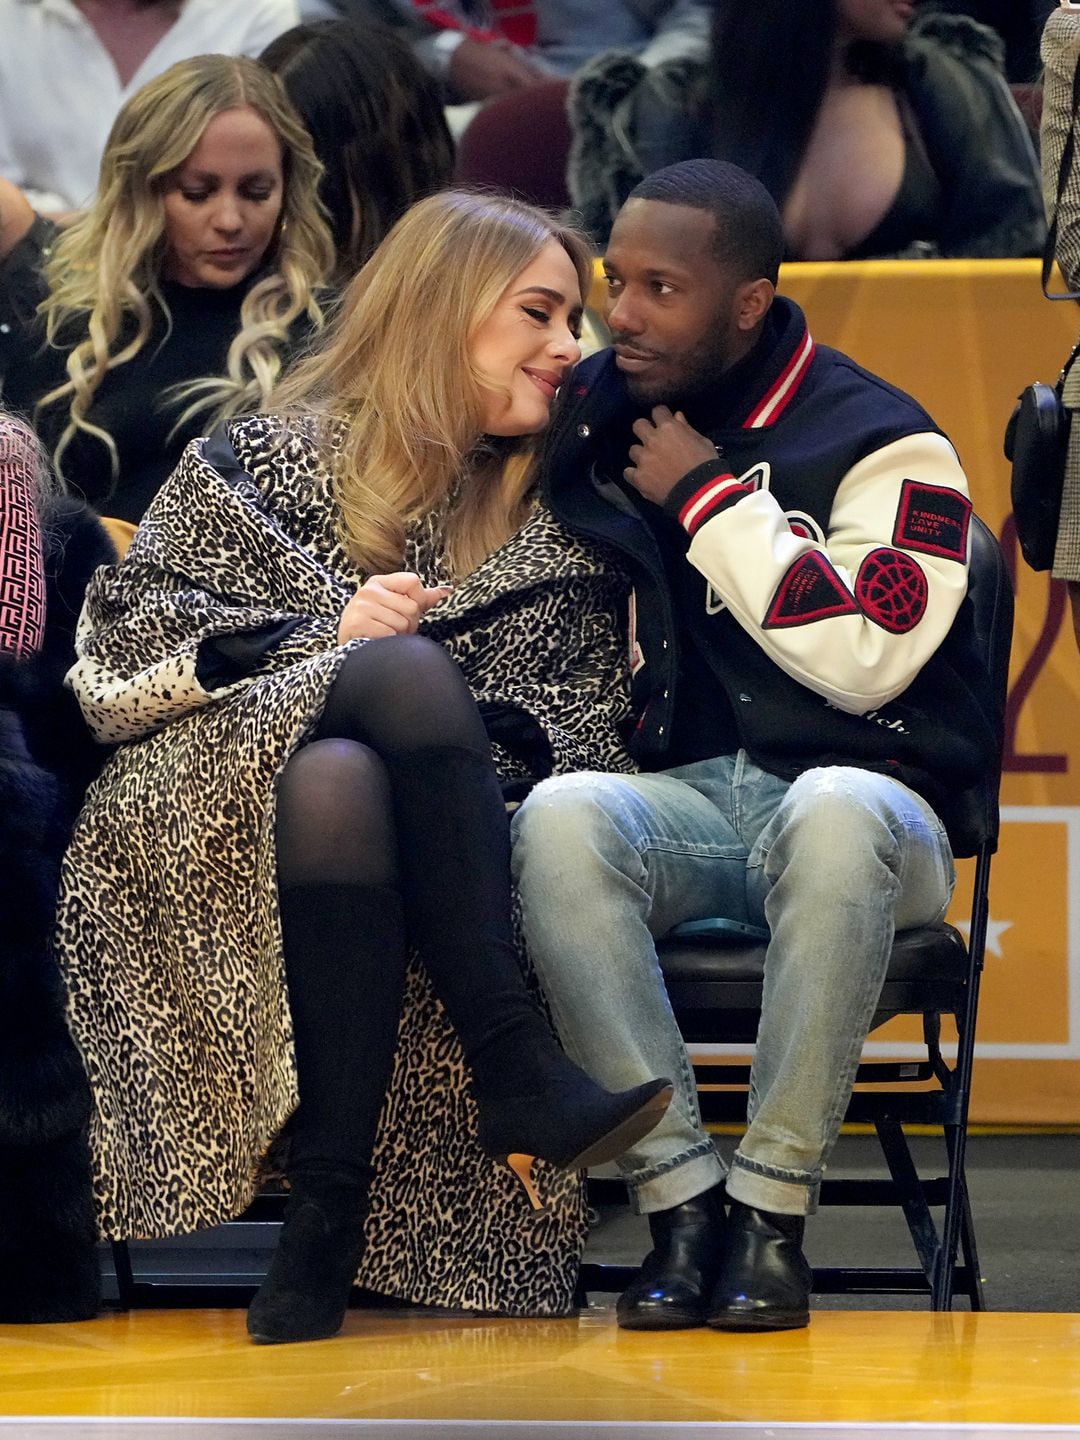 Adele and Rich smiling at each other while sat at a basketball game